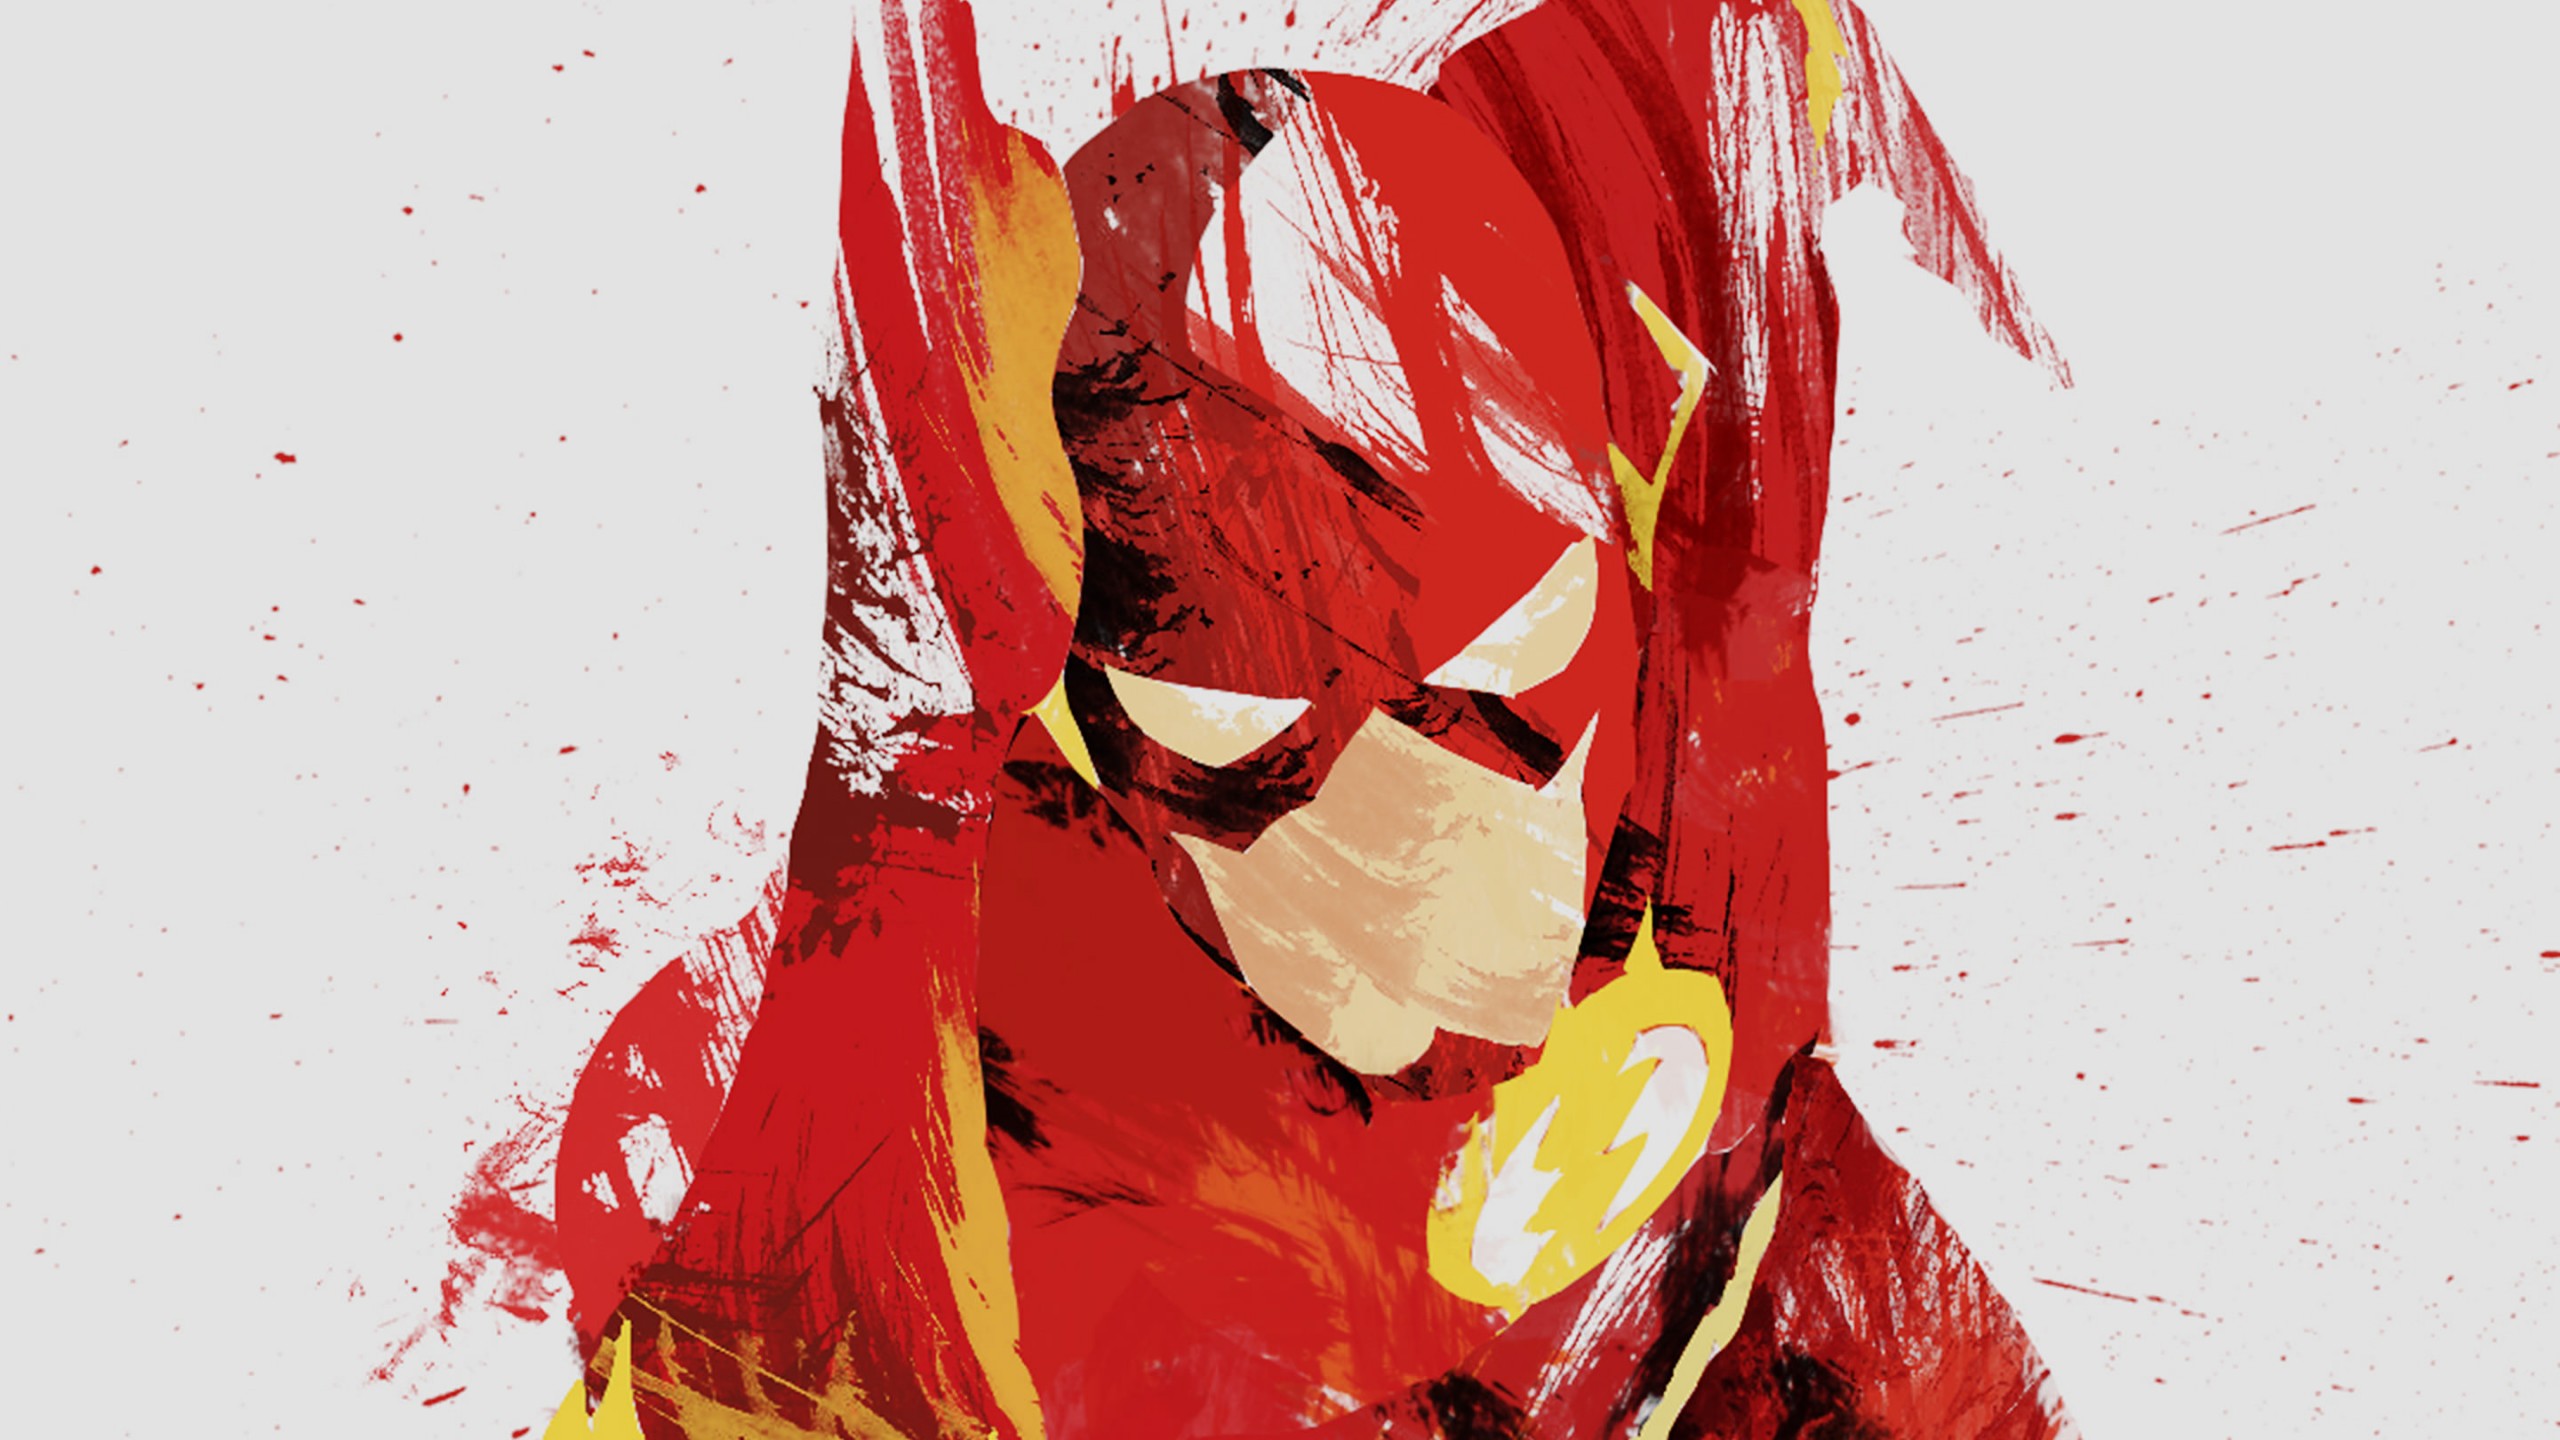 The Flash Illustration HD Wallpaper For X